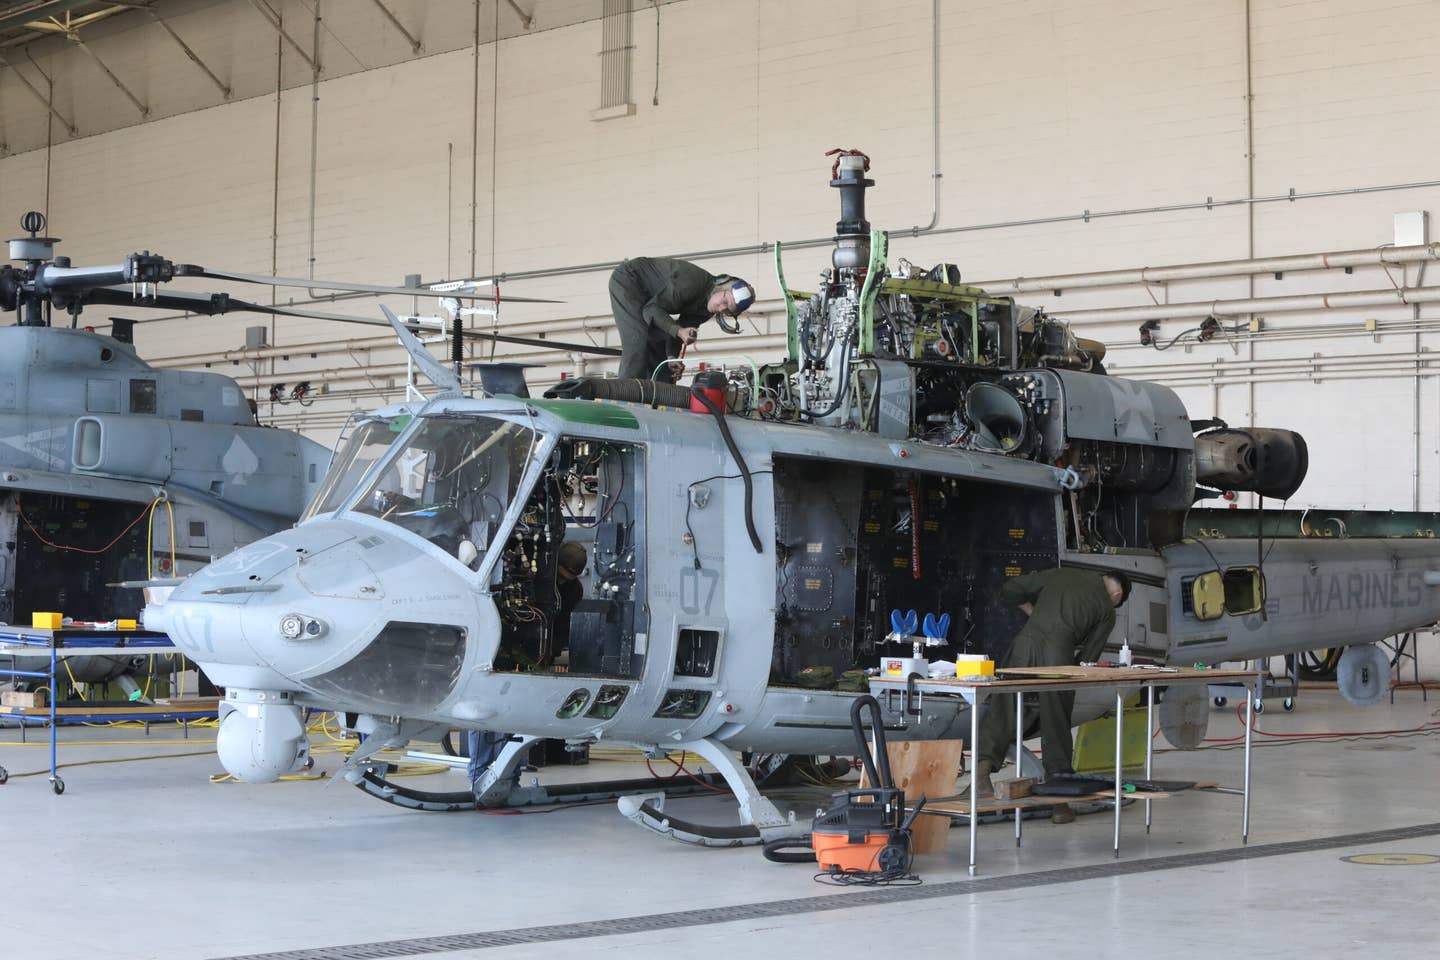 The AH-1 and UH-1 are both born from the same Huey and share the majority of their components, making logistics and forward support far less complex. (Author)